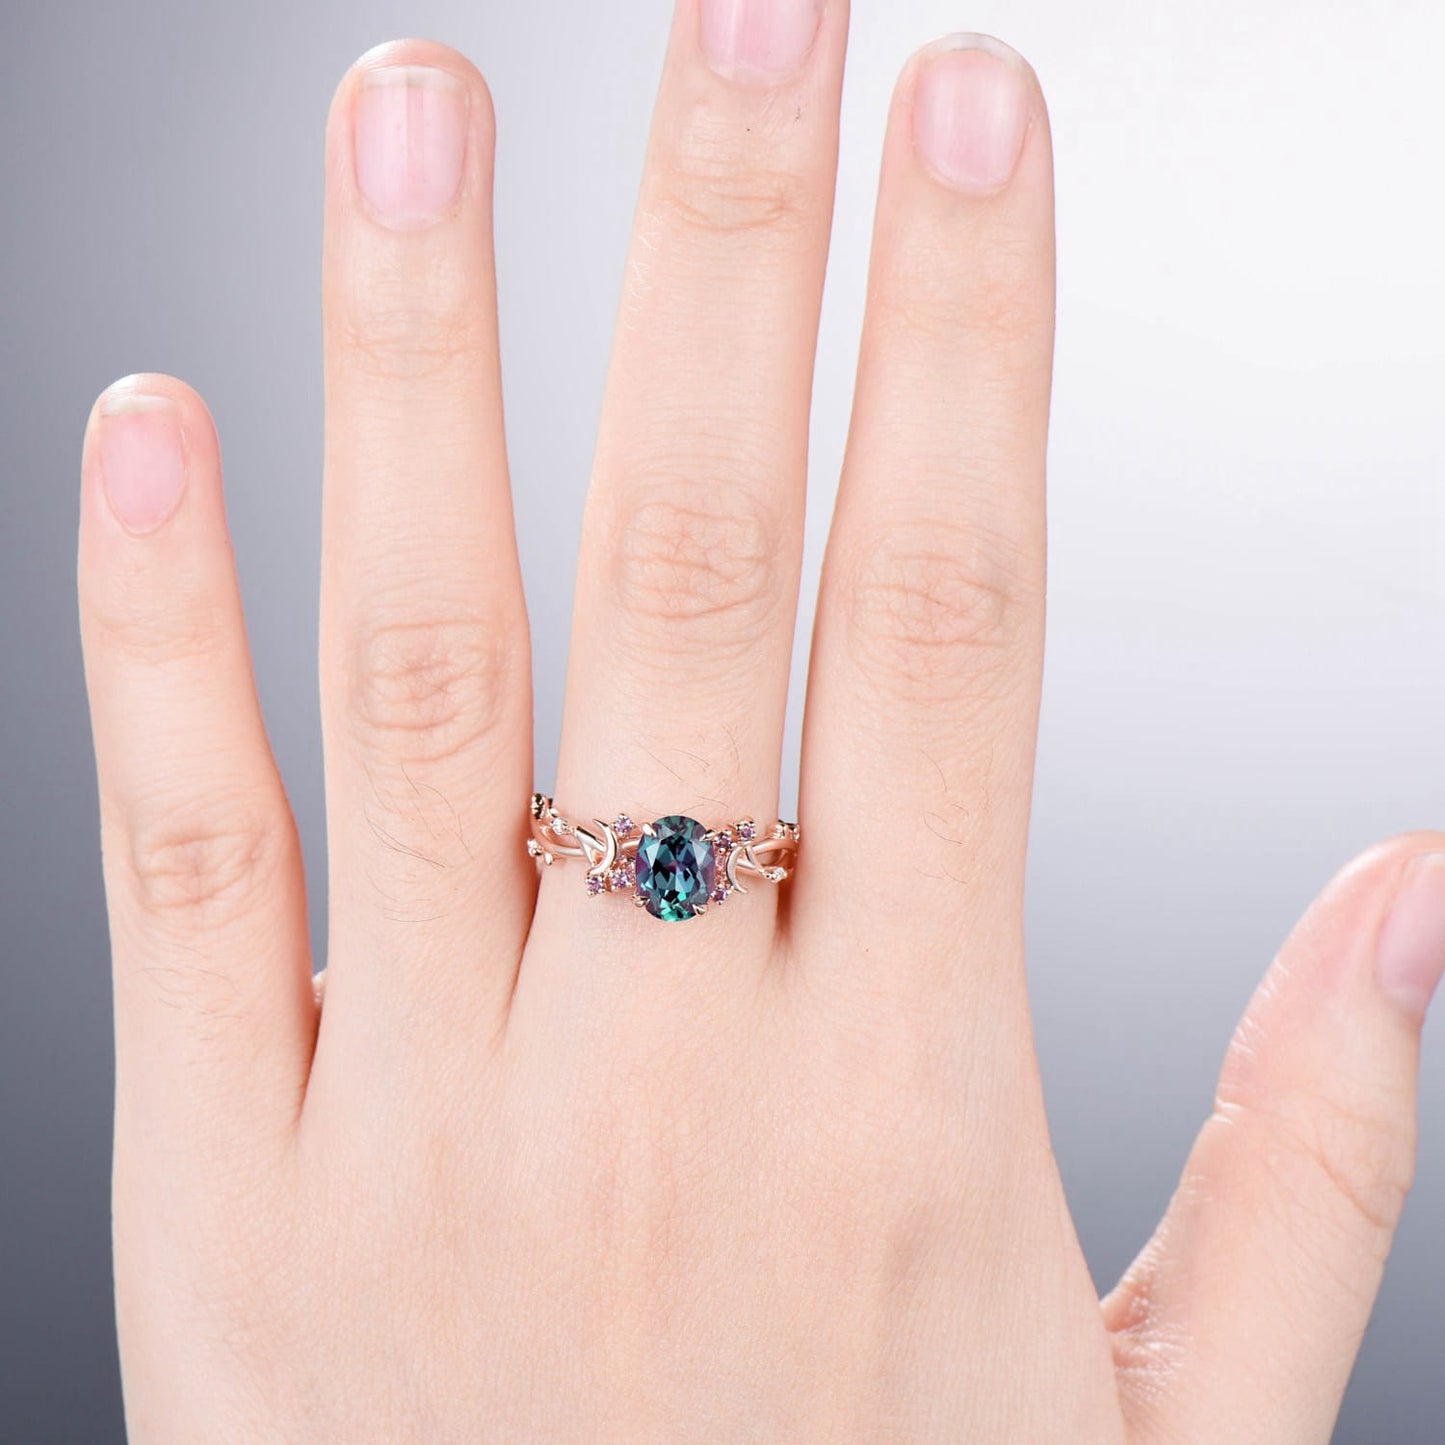 1.5CT Oval Cut Alexandrite Ring Twig Branch Color Change Moon Engagement Ring Vintage Unique Cluster Amethyst Wedding Ring Gift For Women - PENFINE